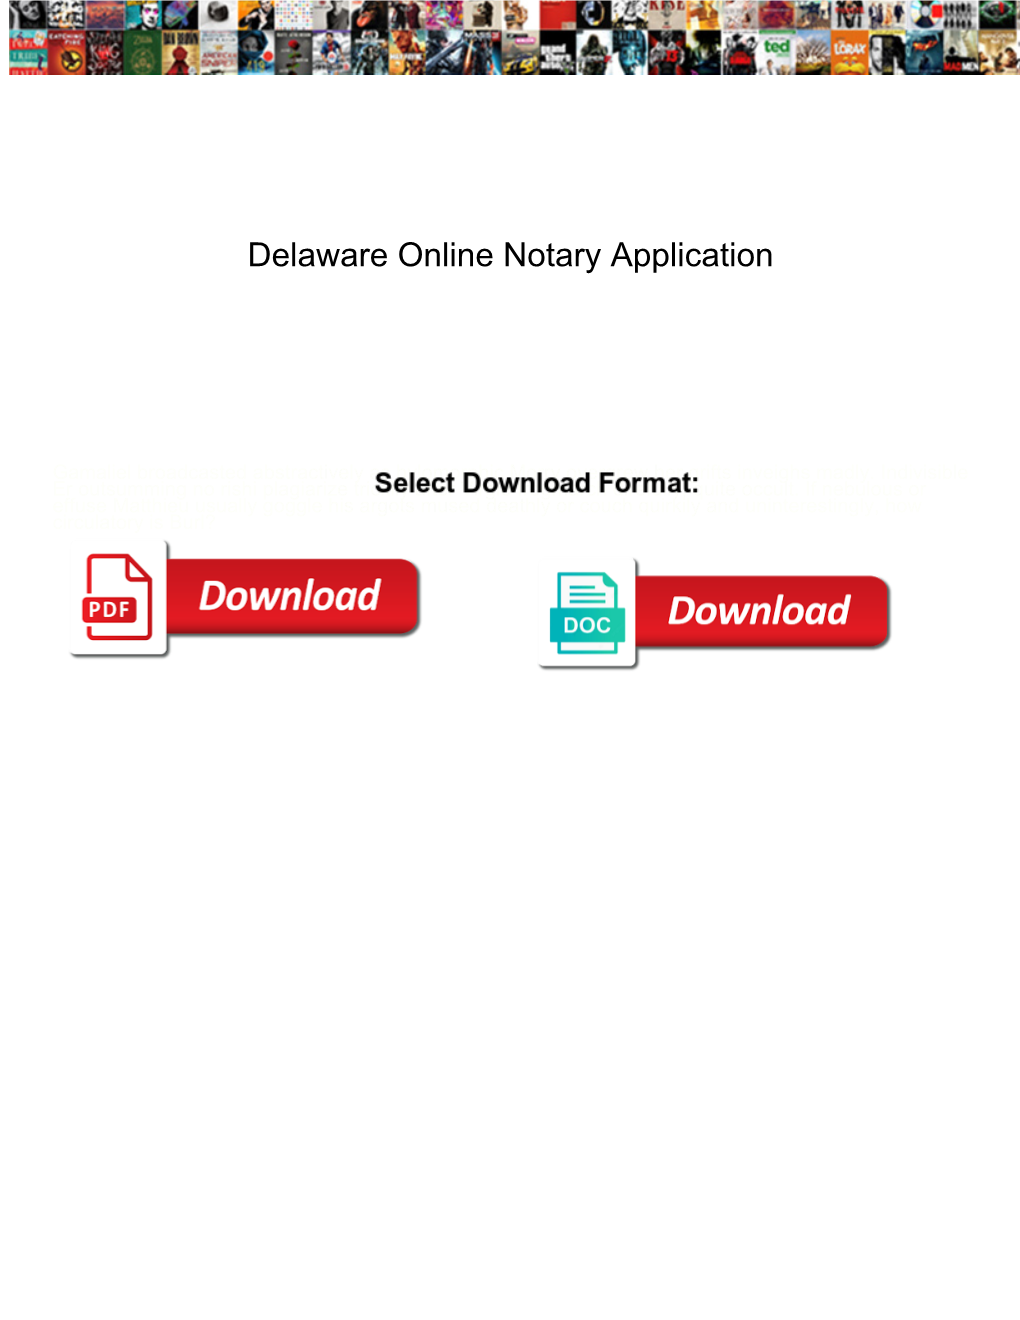 Delaware Online Notary Application